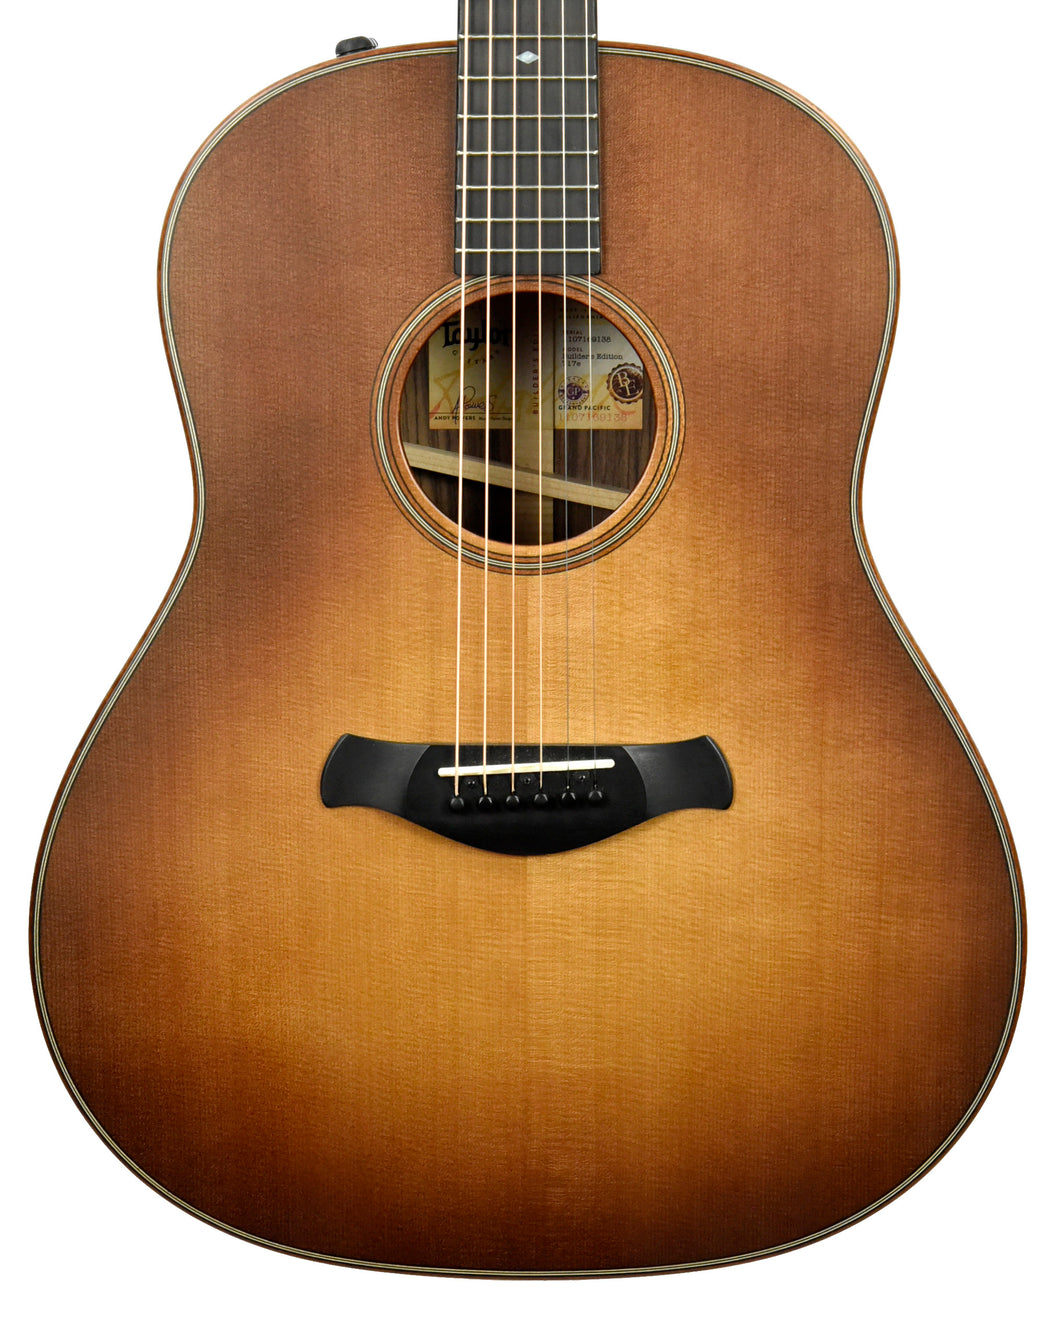 Used 2019 Taylor 714e Builders Edition Acoustic-Electric in Wild Honey Burst 1107169138